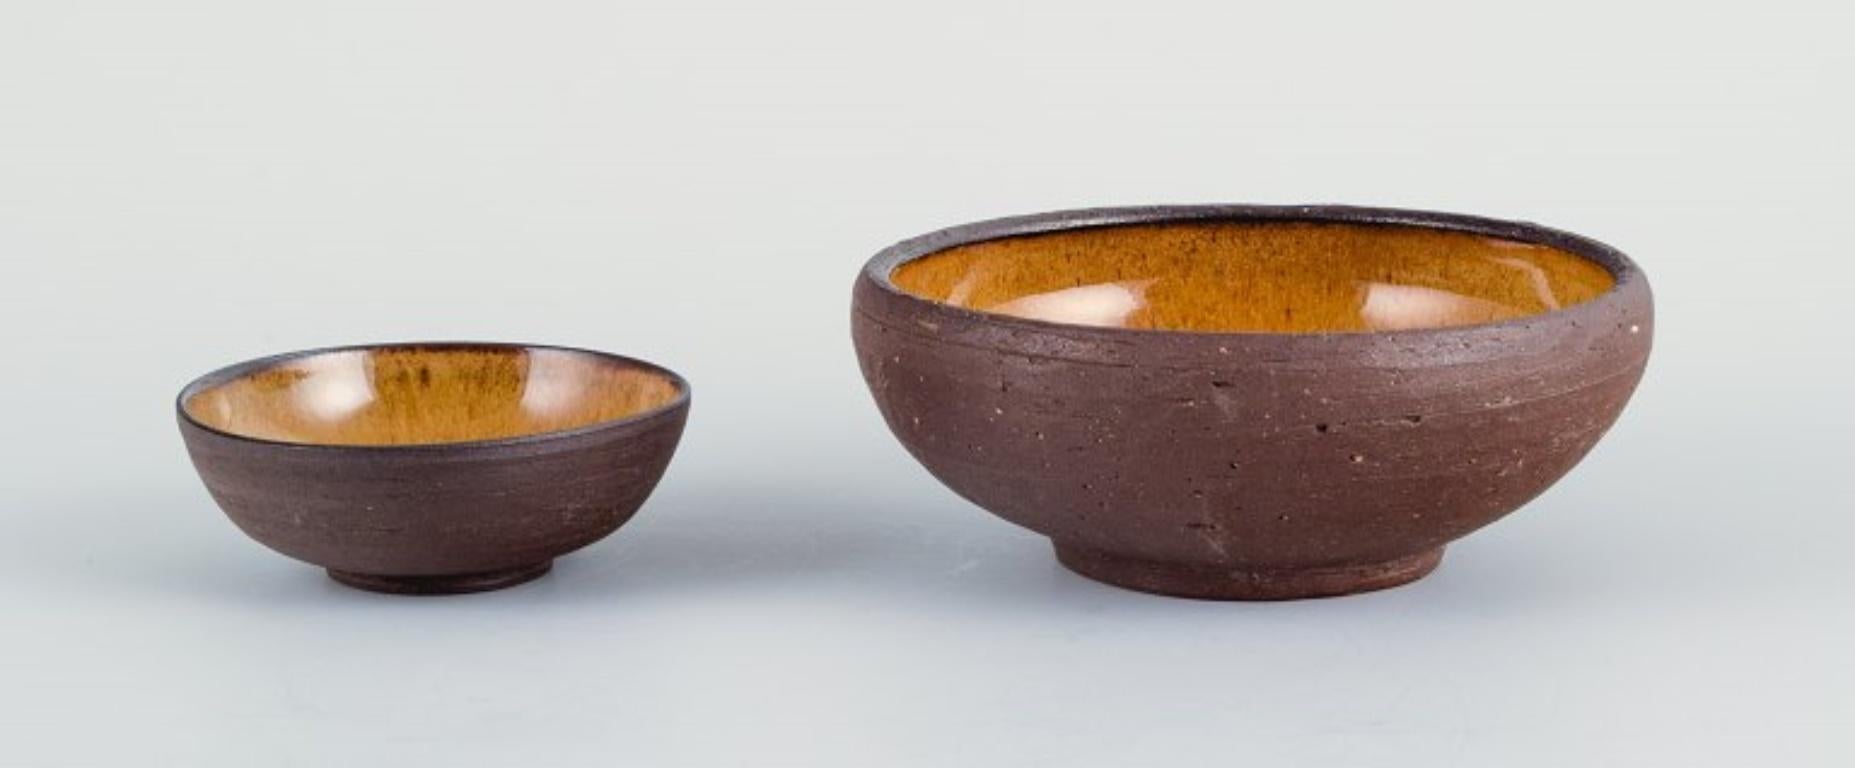 Osa, Denmark.
Two small retro unique ceramic bowls with glaze in yellow-brown tones.
1970s.
In excellent condition.
The large bowl measures: D 12.0 x H 4.5 cm.

OSA was a collaboration between Aase Feilberg, Chr. Frederiksen and Gutte Eriksen.